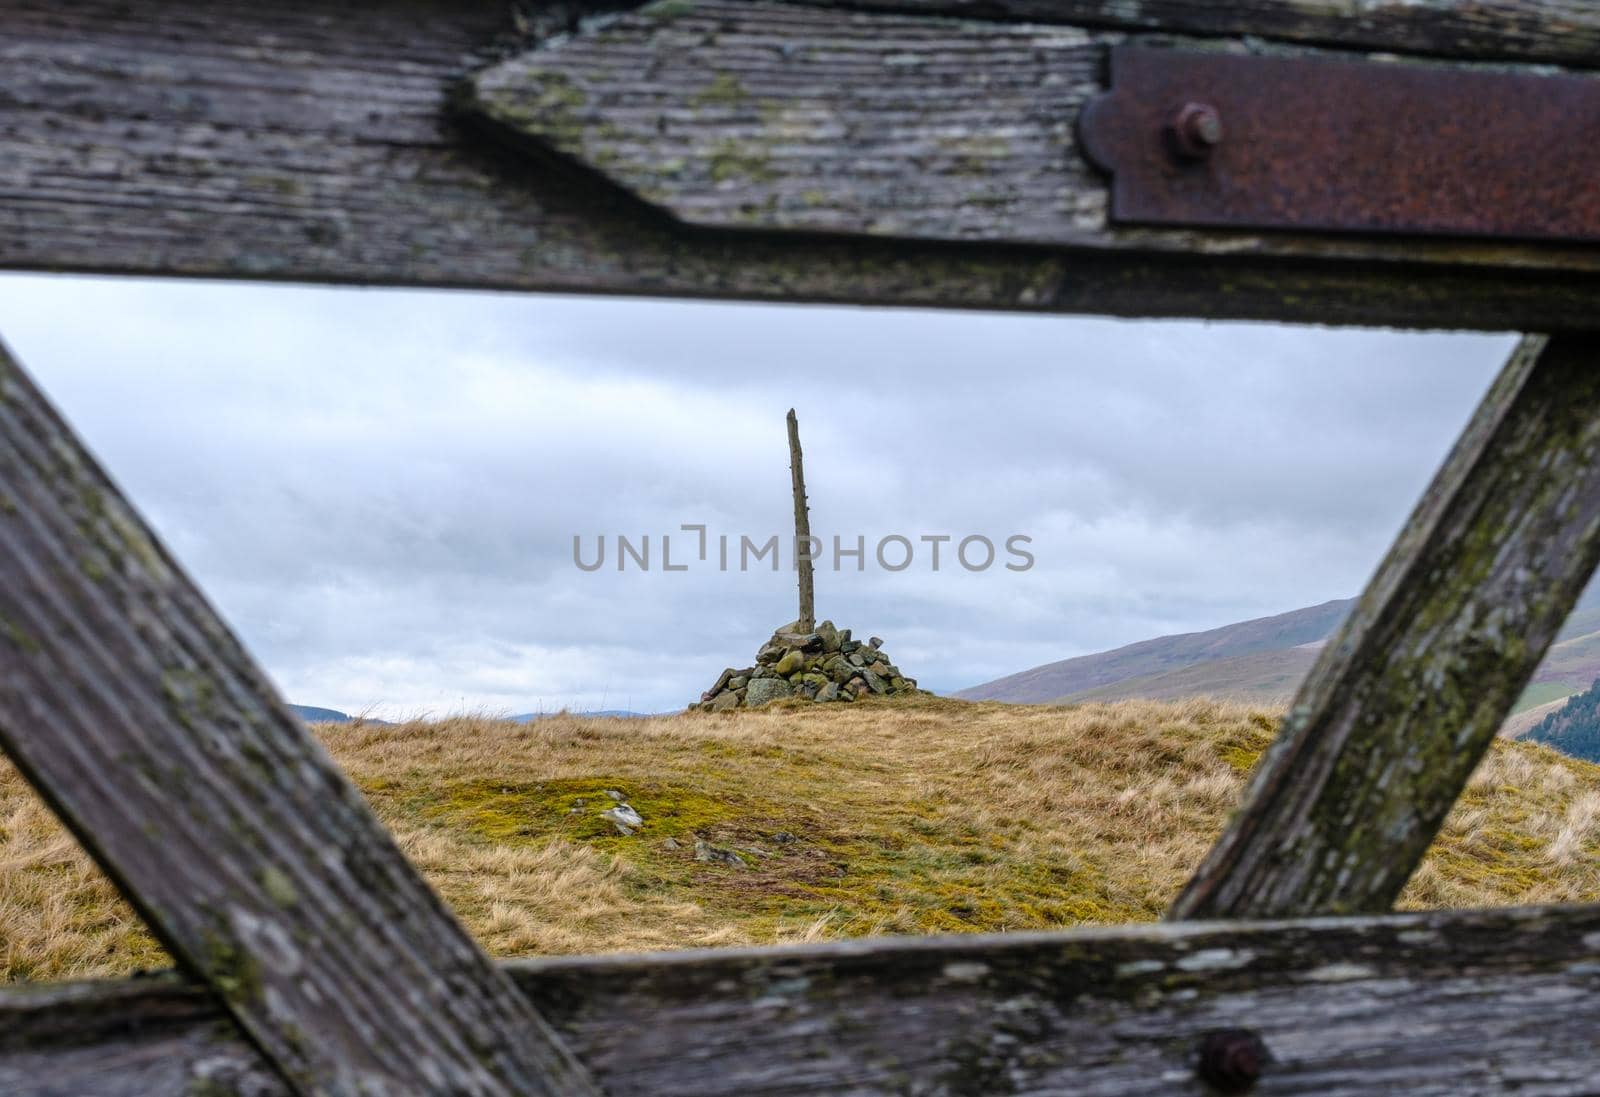 A Cairn (Pile or Stack of Stones) To Mark The Summit Of A Hill In Scotland Framed Through A Wooden Gate